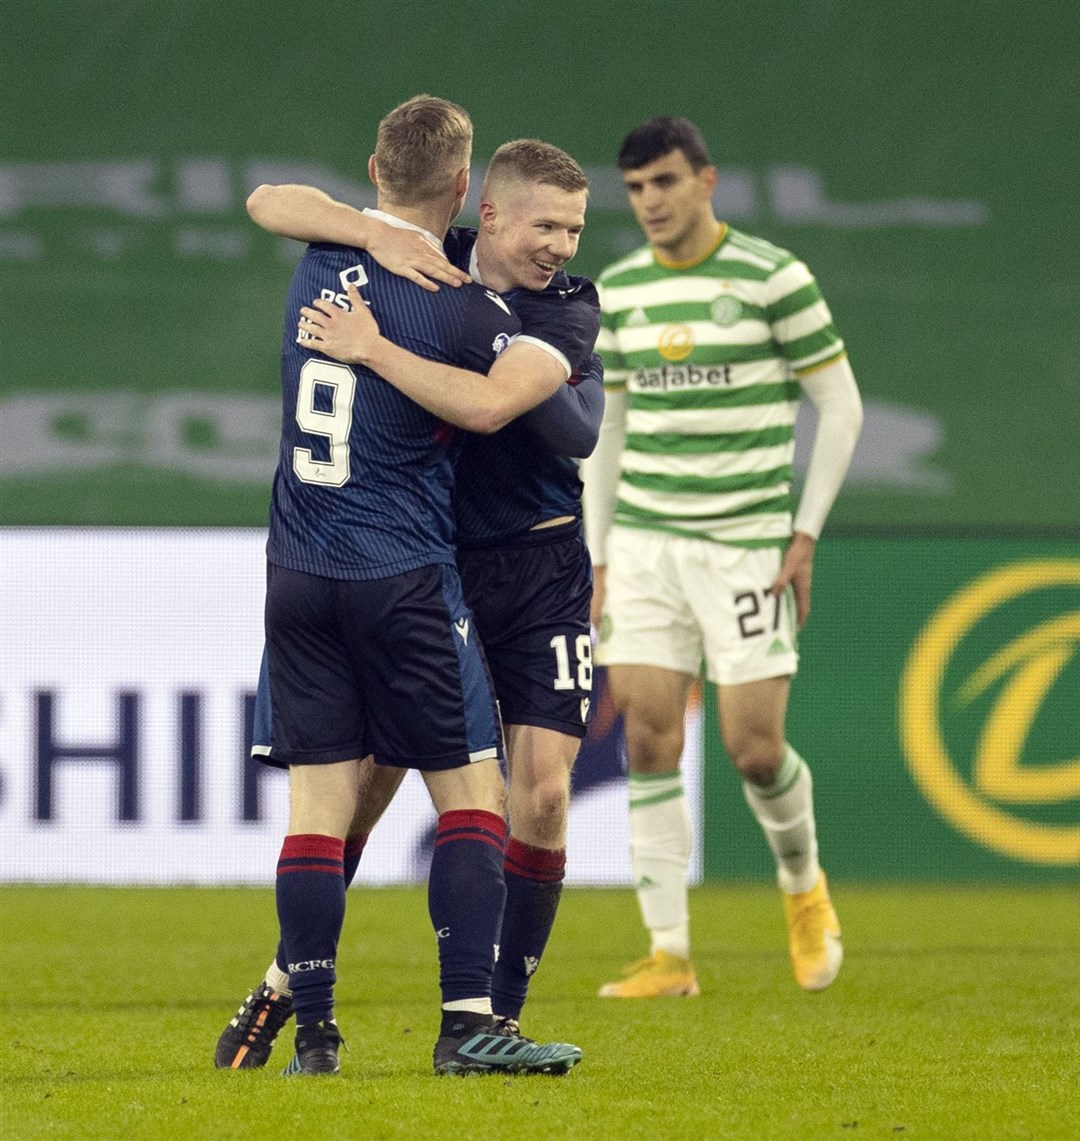 Picture - Ken Macpherson, Inverness. Scottish League Cup 2nd Round. Celtic(0) v Ross County(2). 29.11.20. Ross County's Stephen Kelly and Billy McKay celebrate after the final whistle in front of a disappointed Celtic’s Mohamed Elyounoussi.